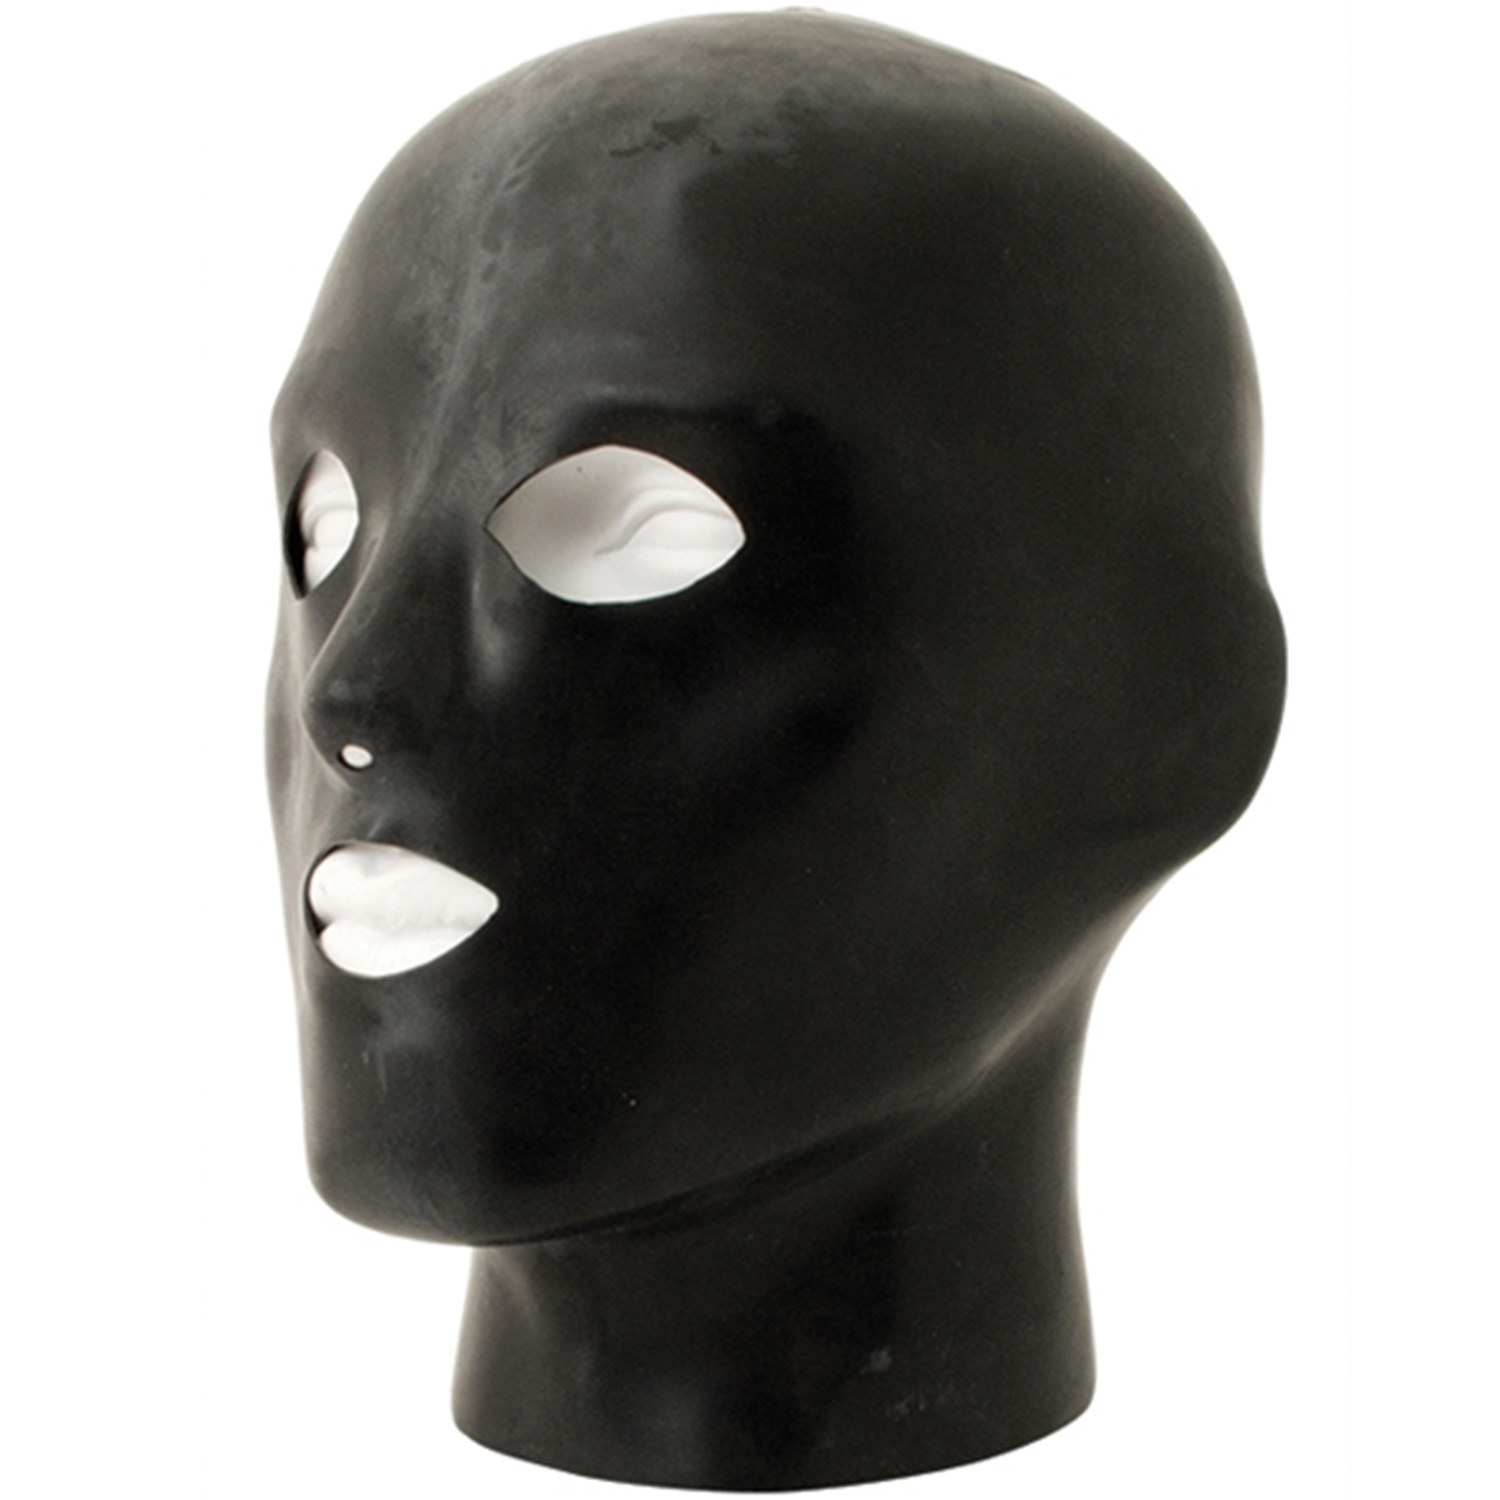 Mister B Rubber Heavy Duty Anatomical Hood With Holes - Sort - L/XL